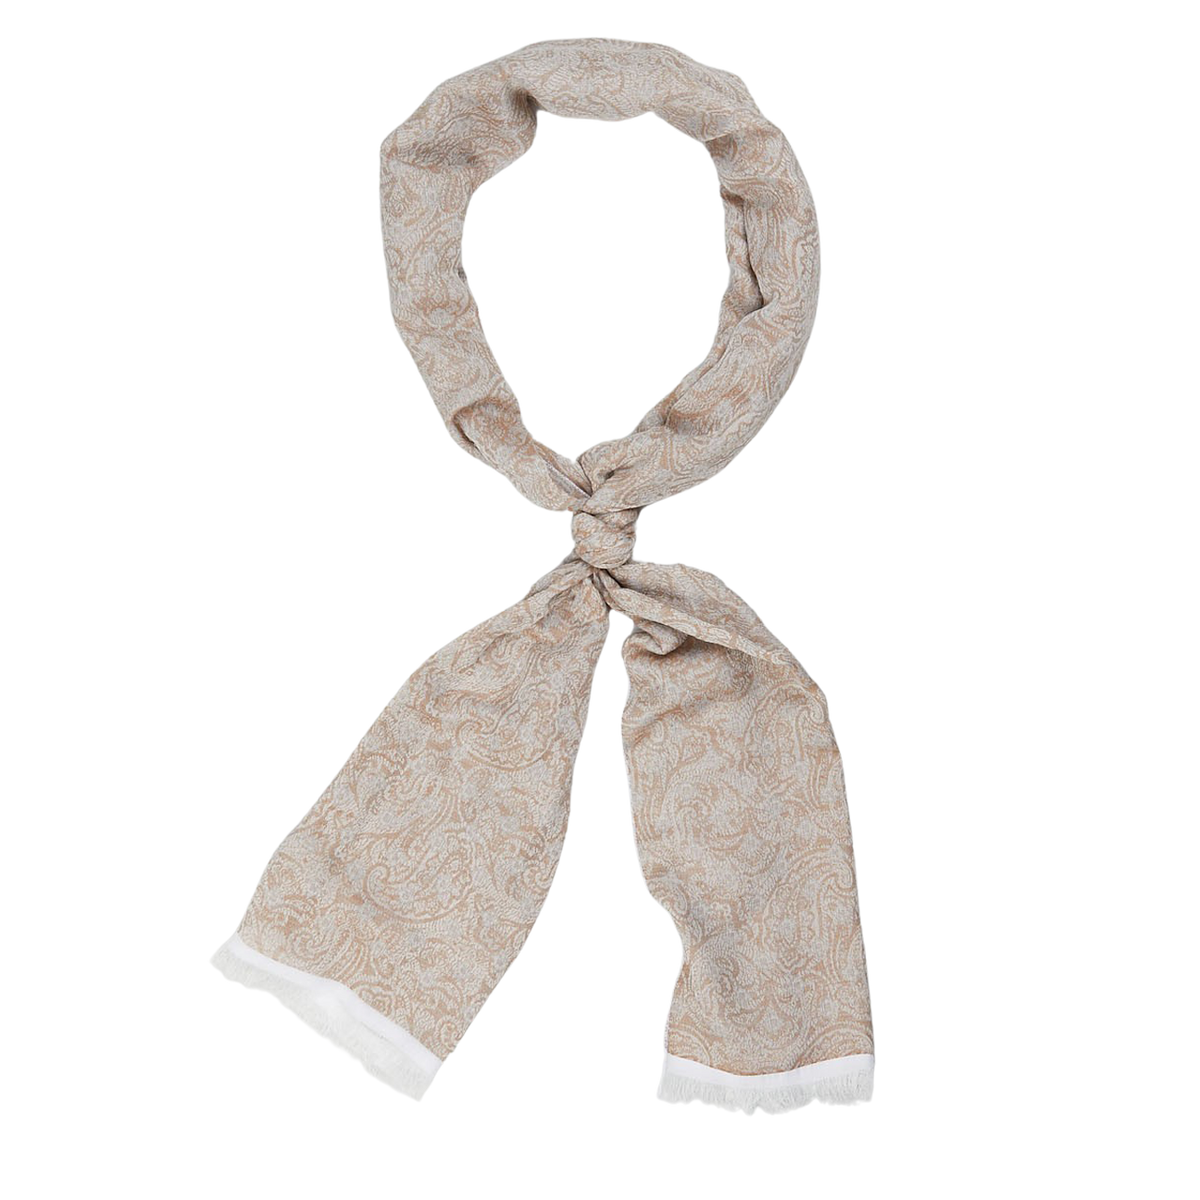 Beige Grey Woven Paisley Cotton Scarf by Amanda Christensen with a knot tied at the center displayed on a white background.